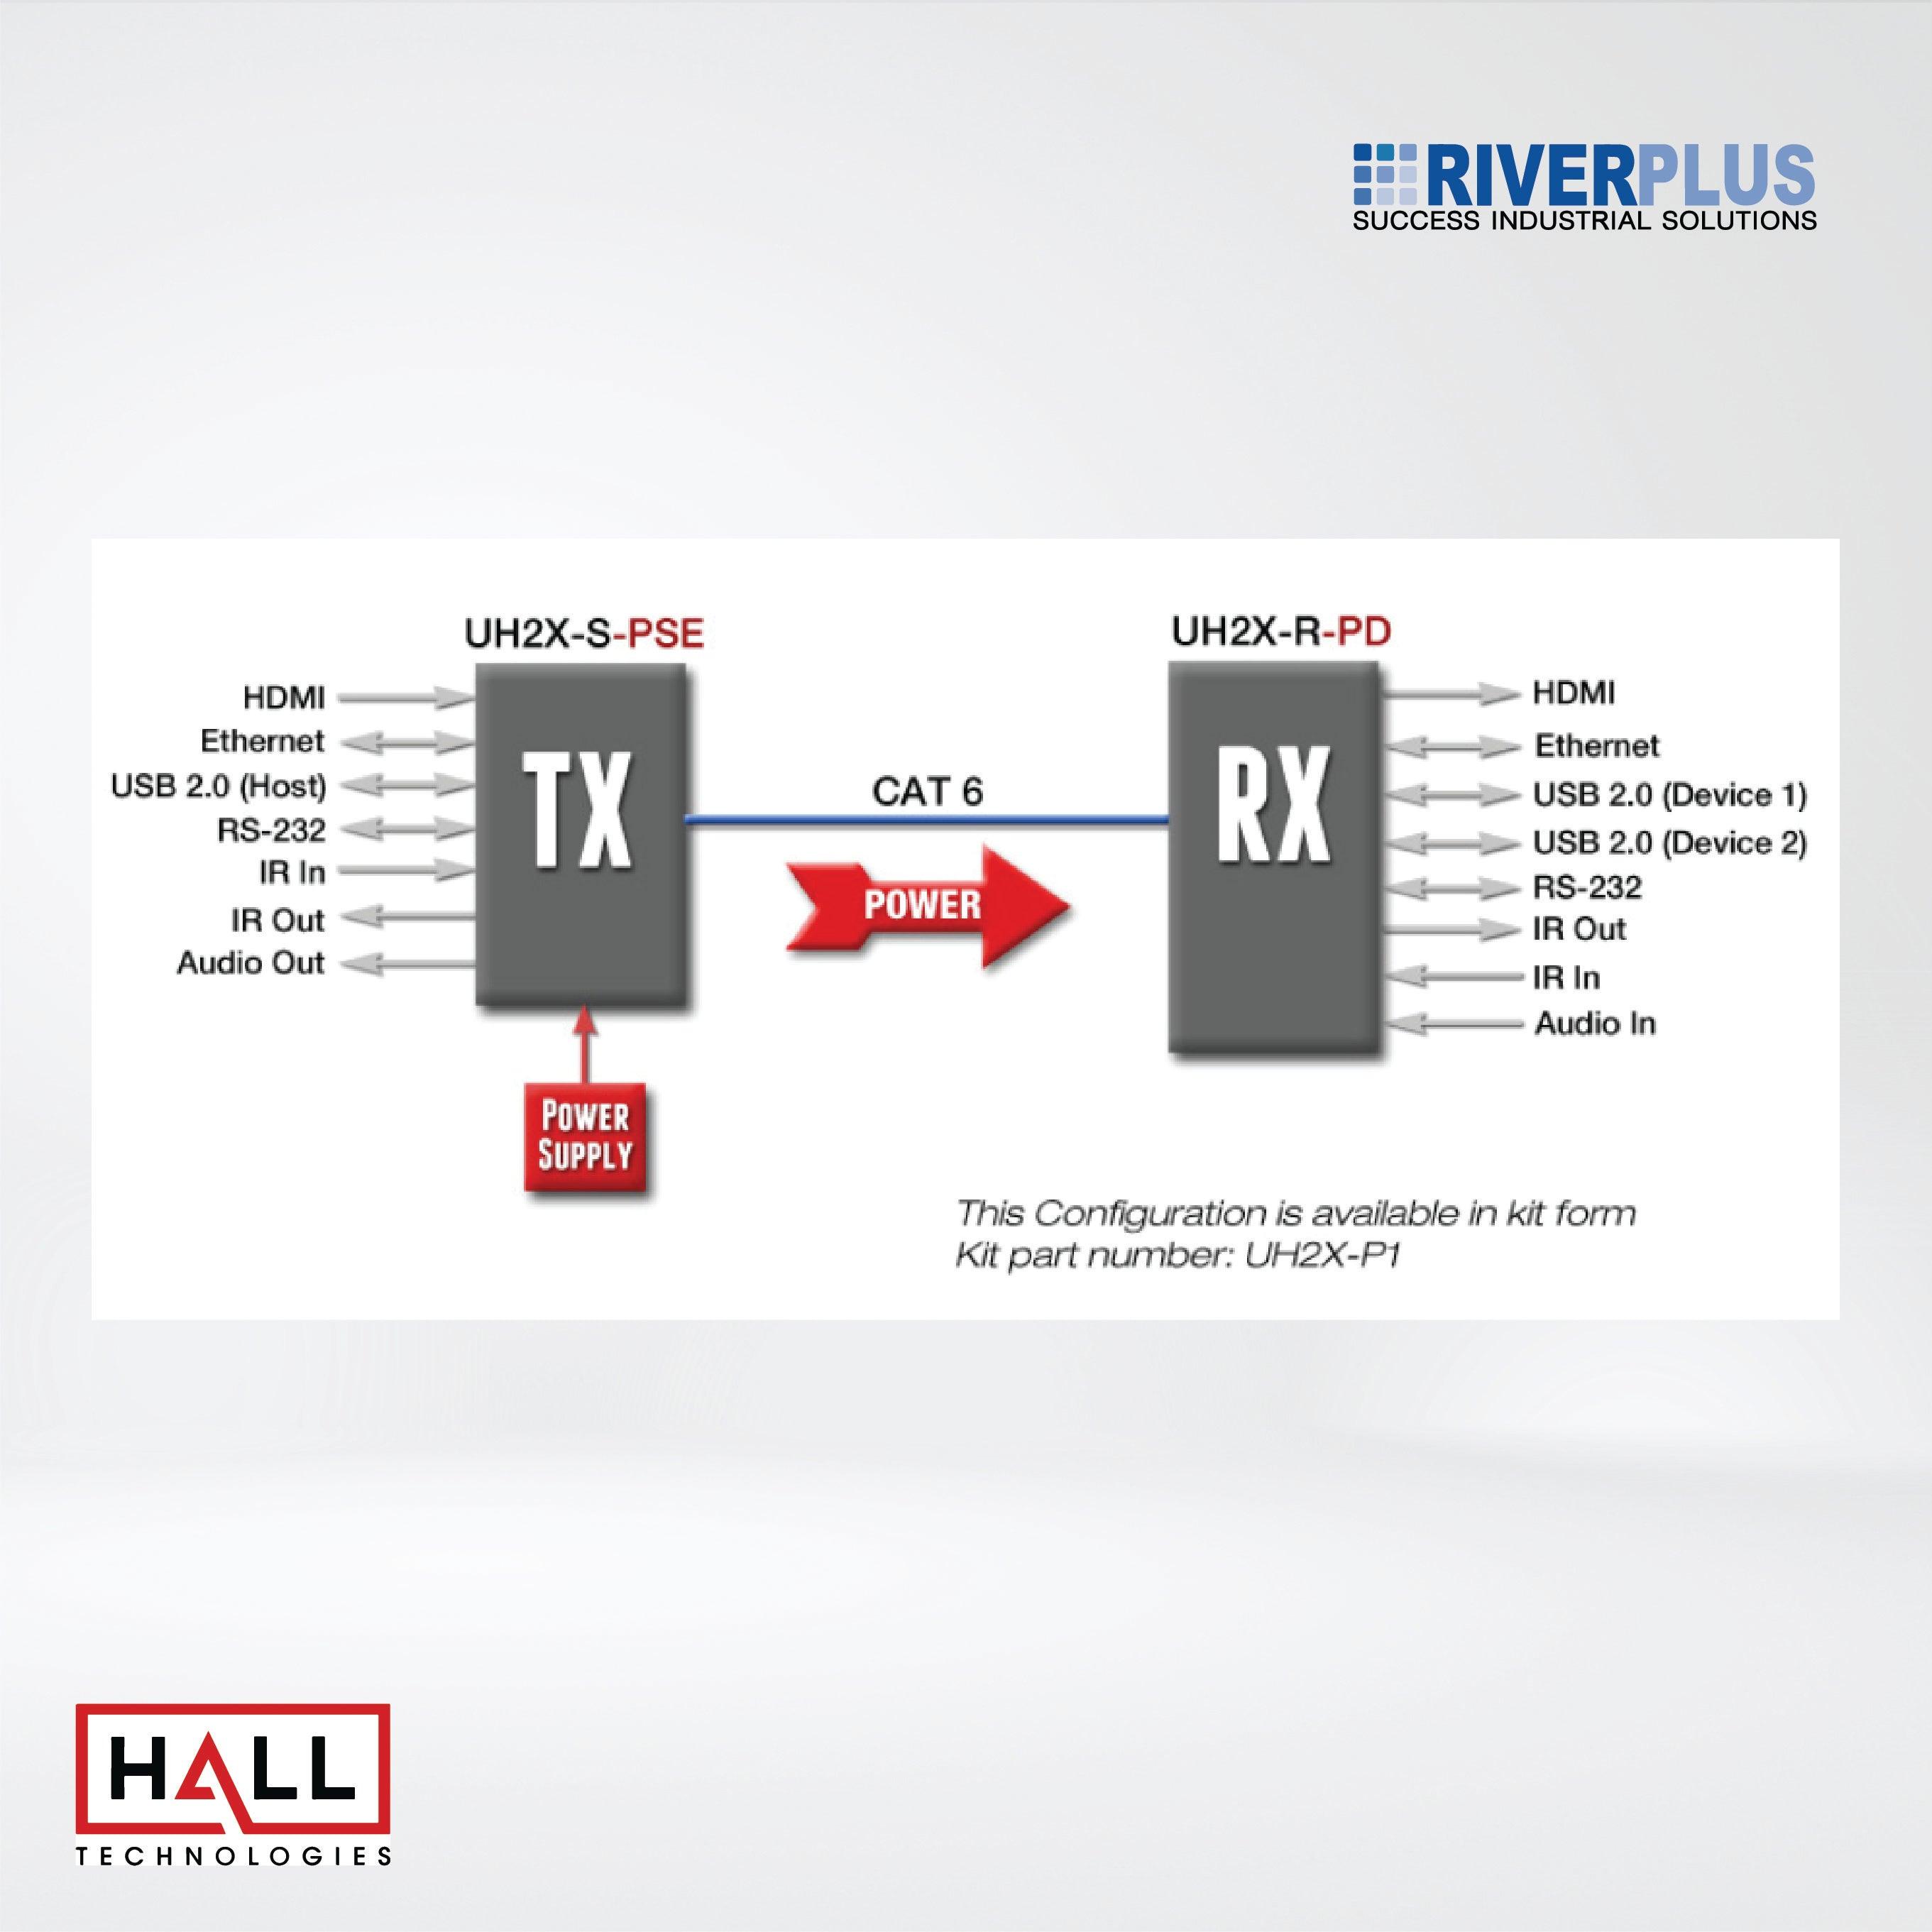 UH2X-R-PD HDMI + USB + LAN over UTP Extender with HDBaseT™ and PoH (Receiver) - Riverplus